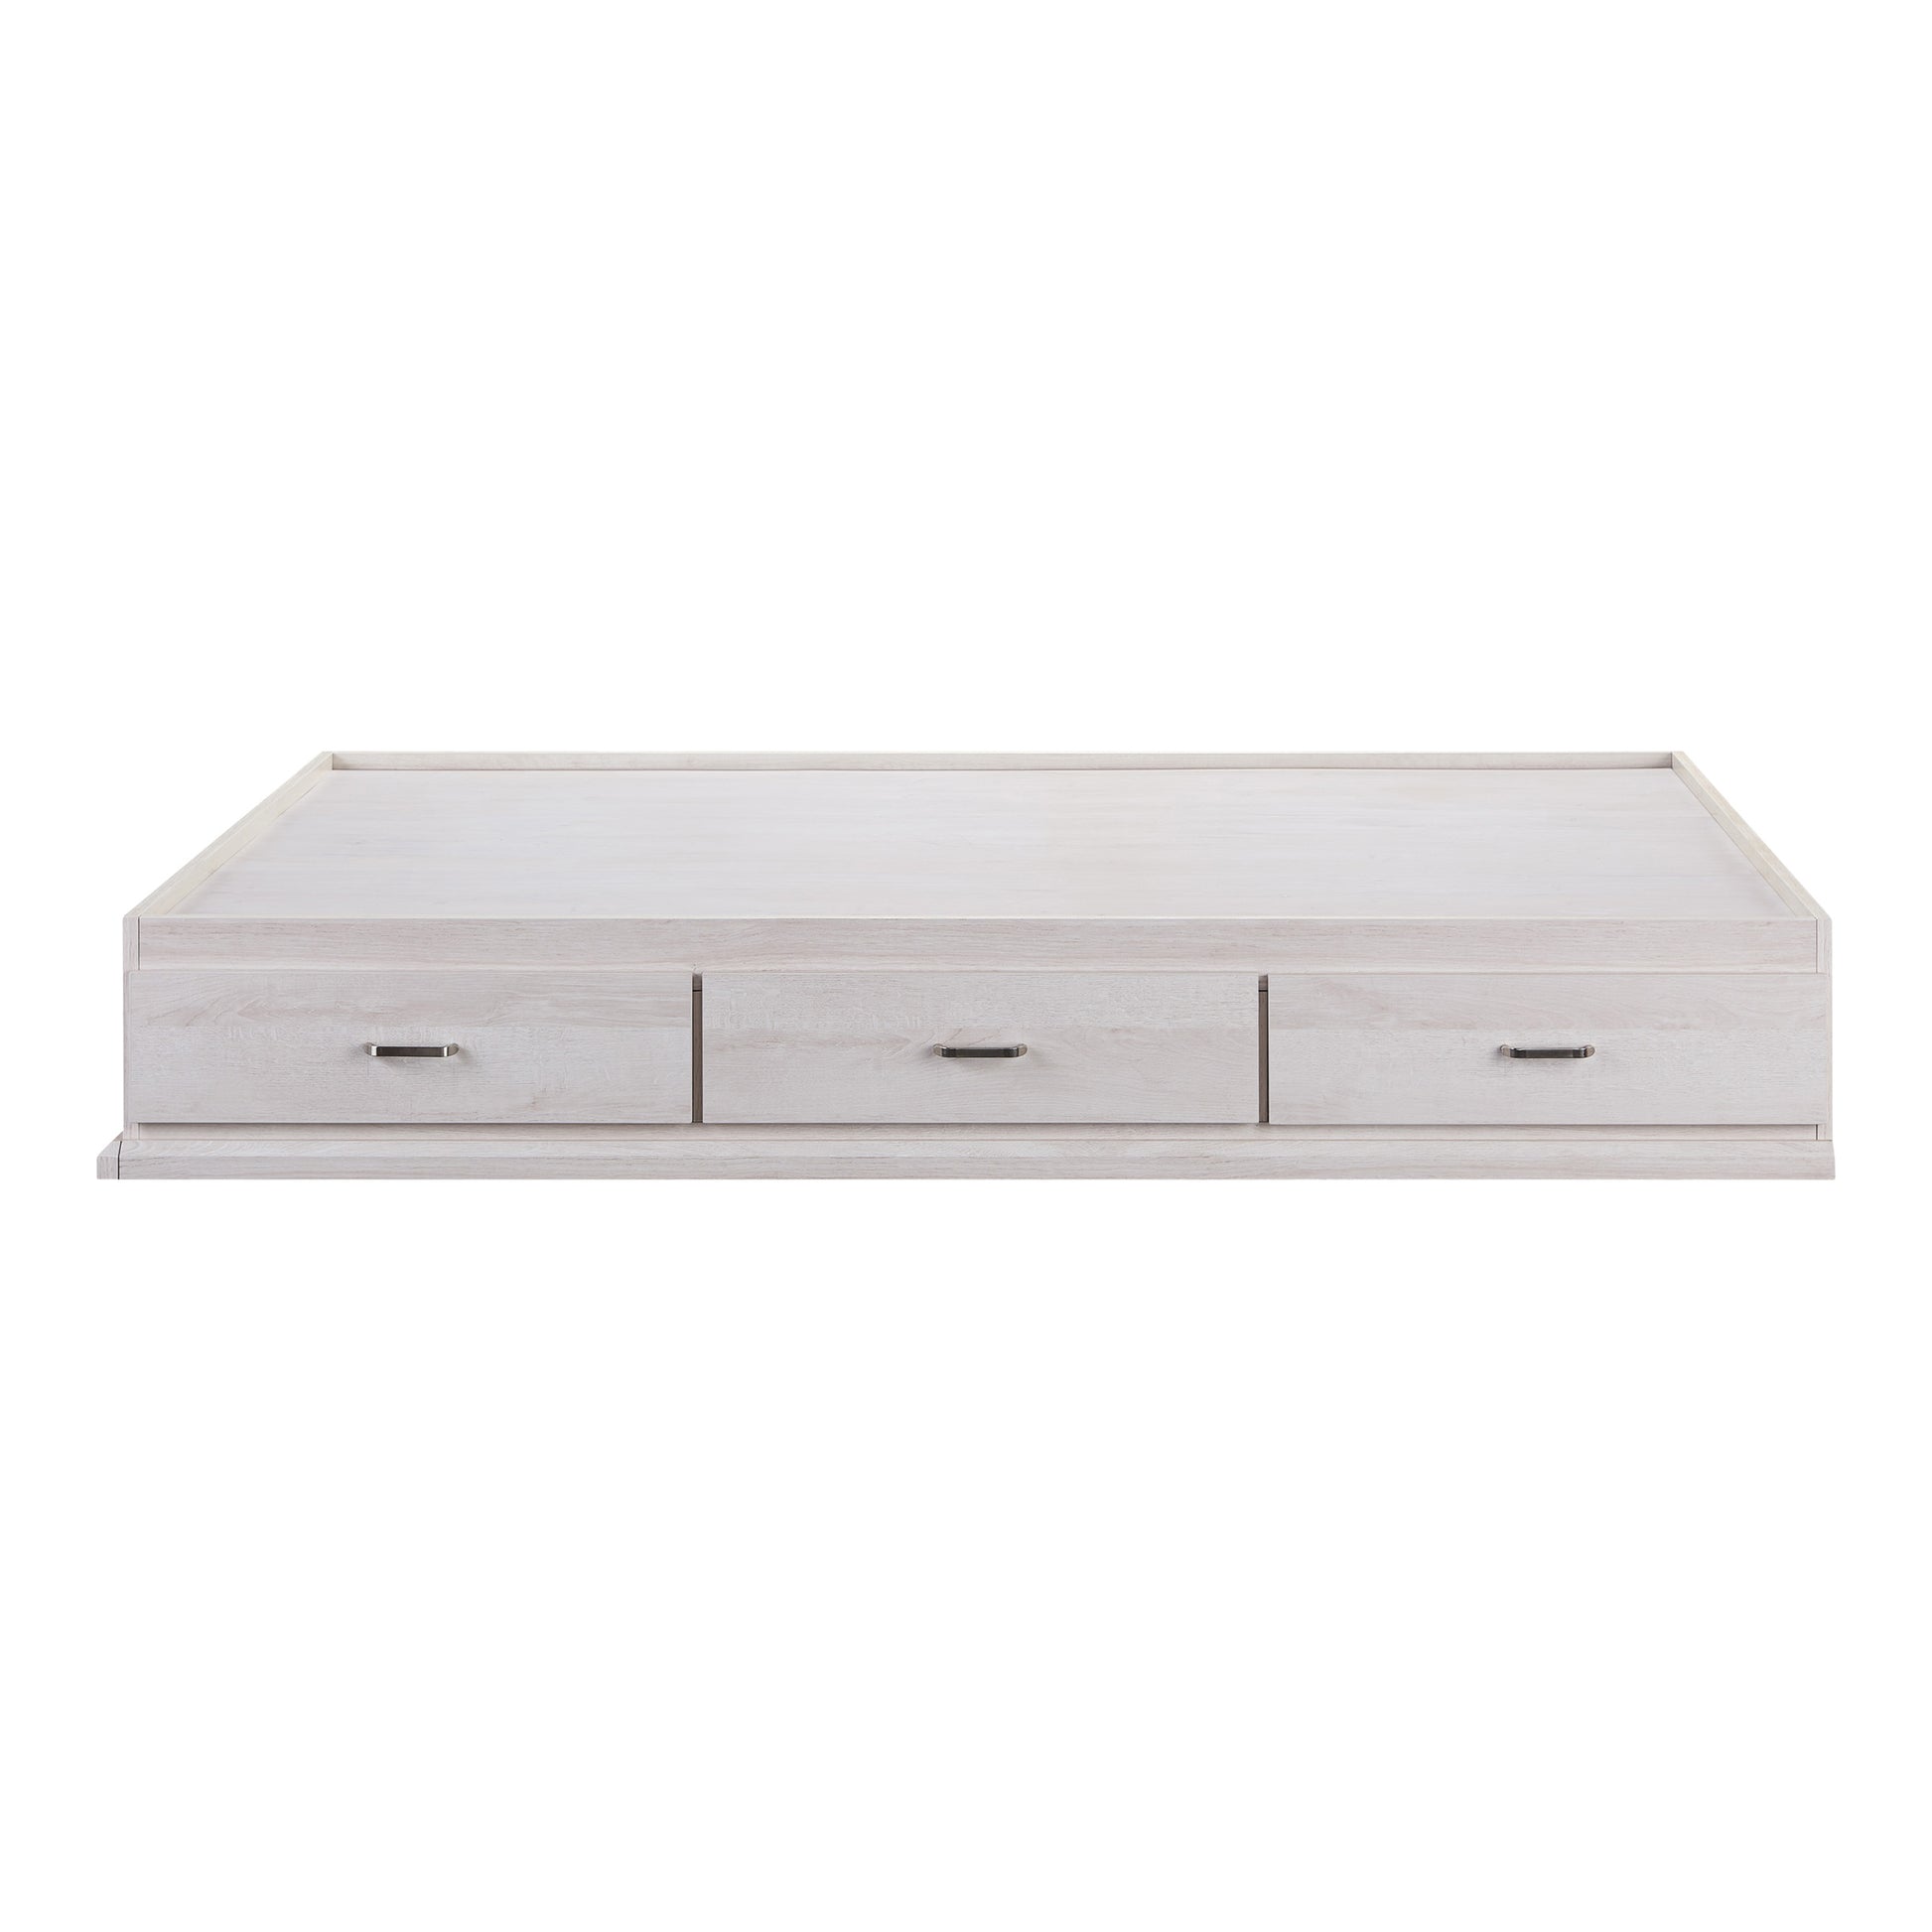 Front-facing side view of a contemporary white oak three-drawer platform storage bed on a white background